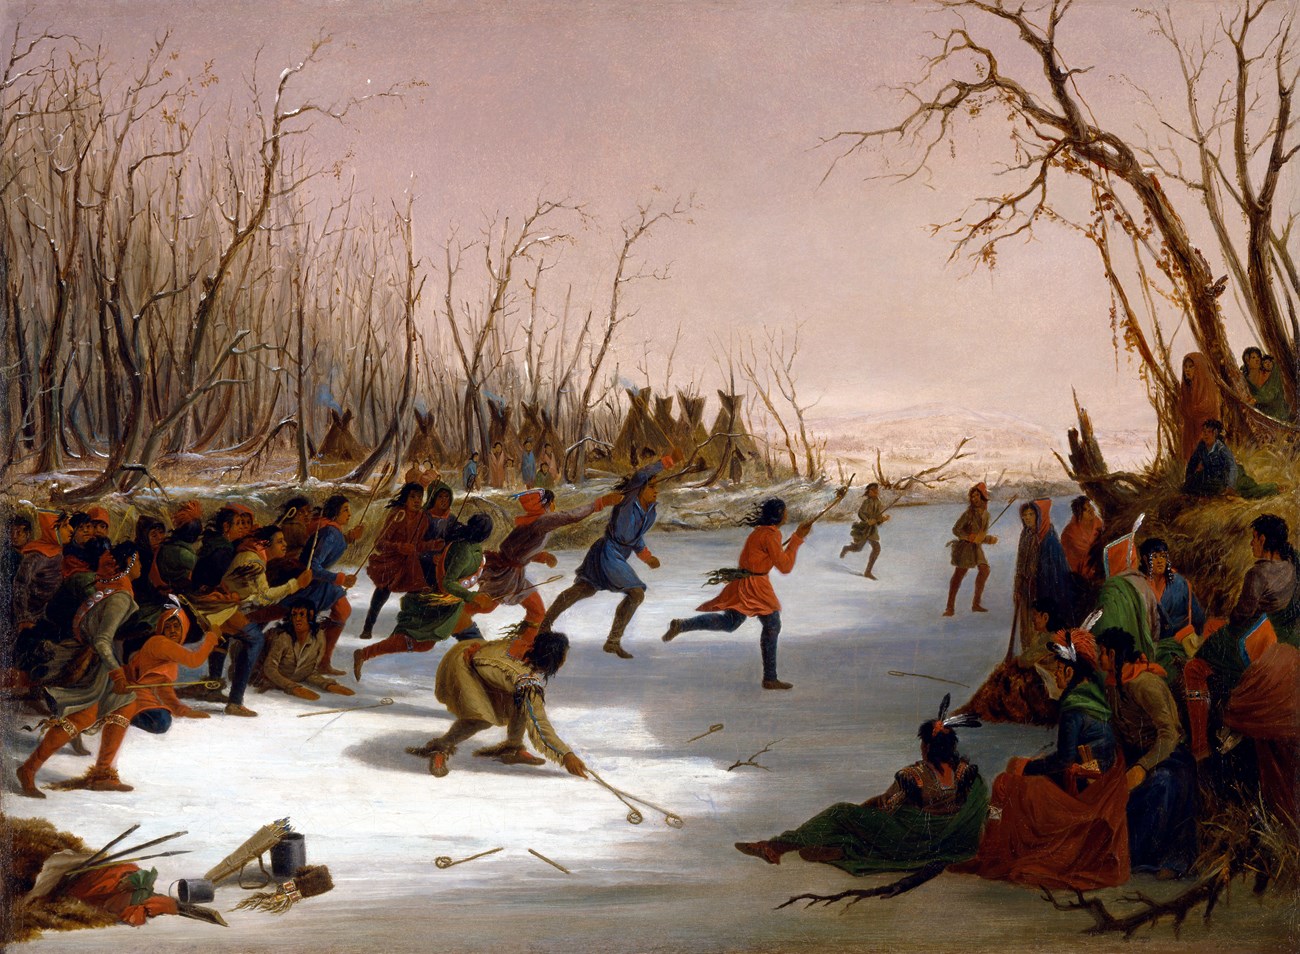 People in historic clothing playing lacrosse on an icy river.